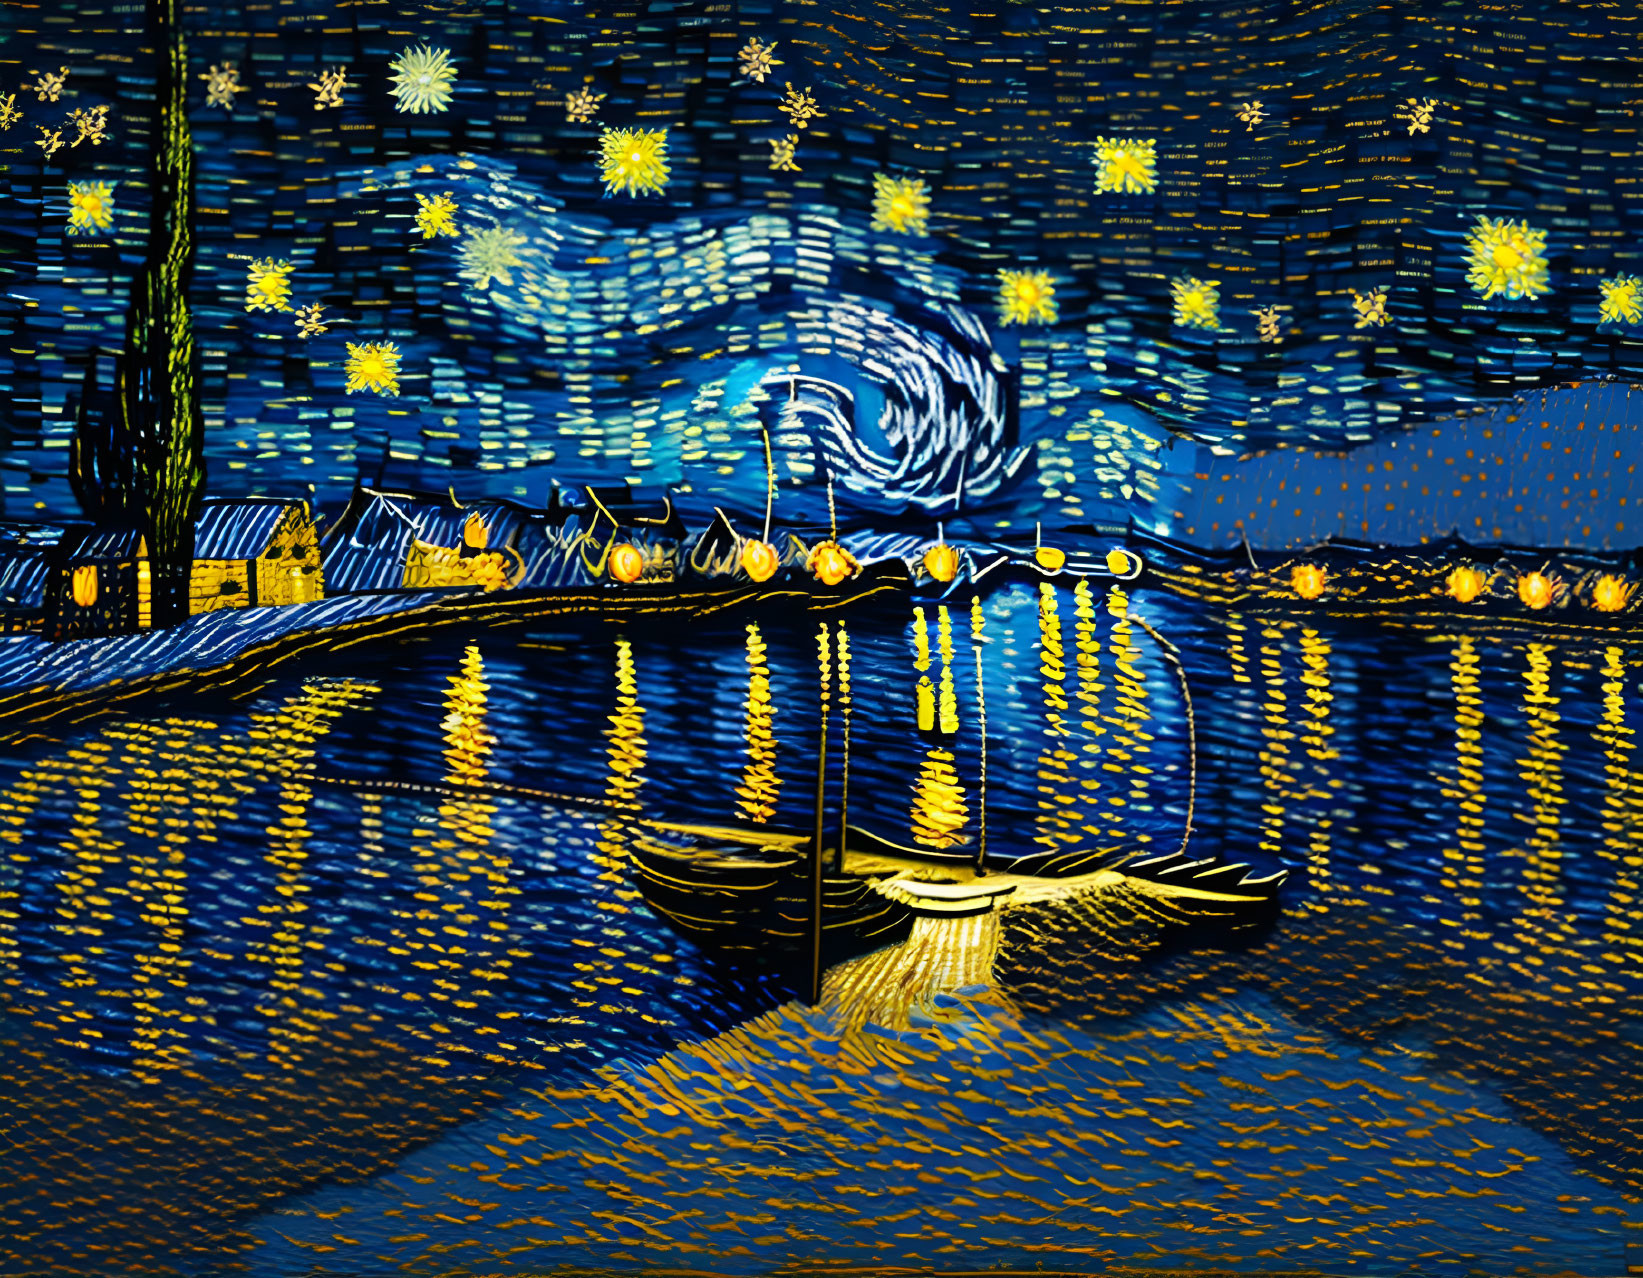 Colorful digital artwork inspired by swirling night sky over serene village with water reflections